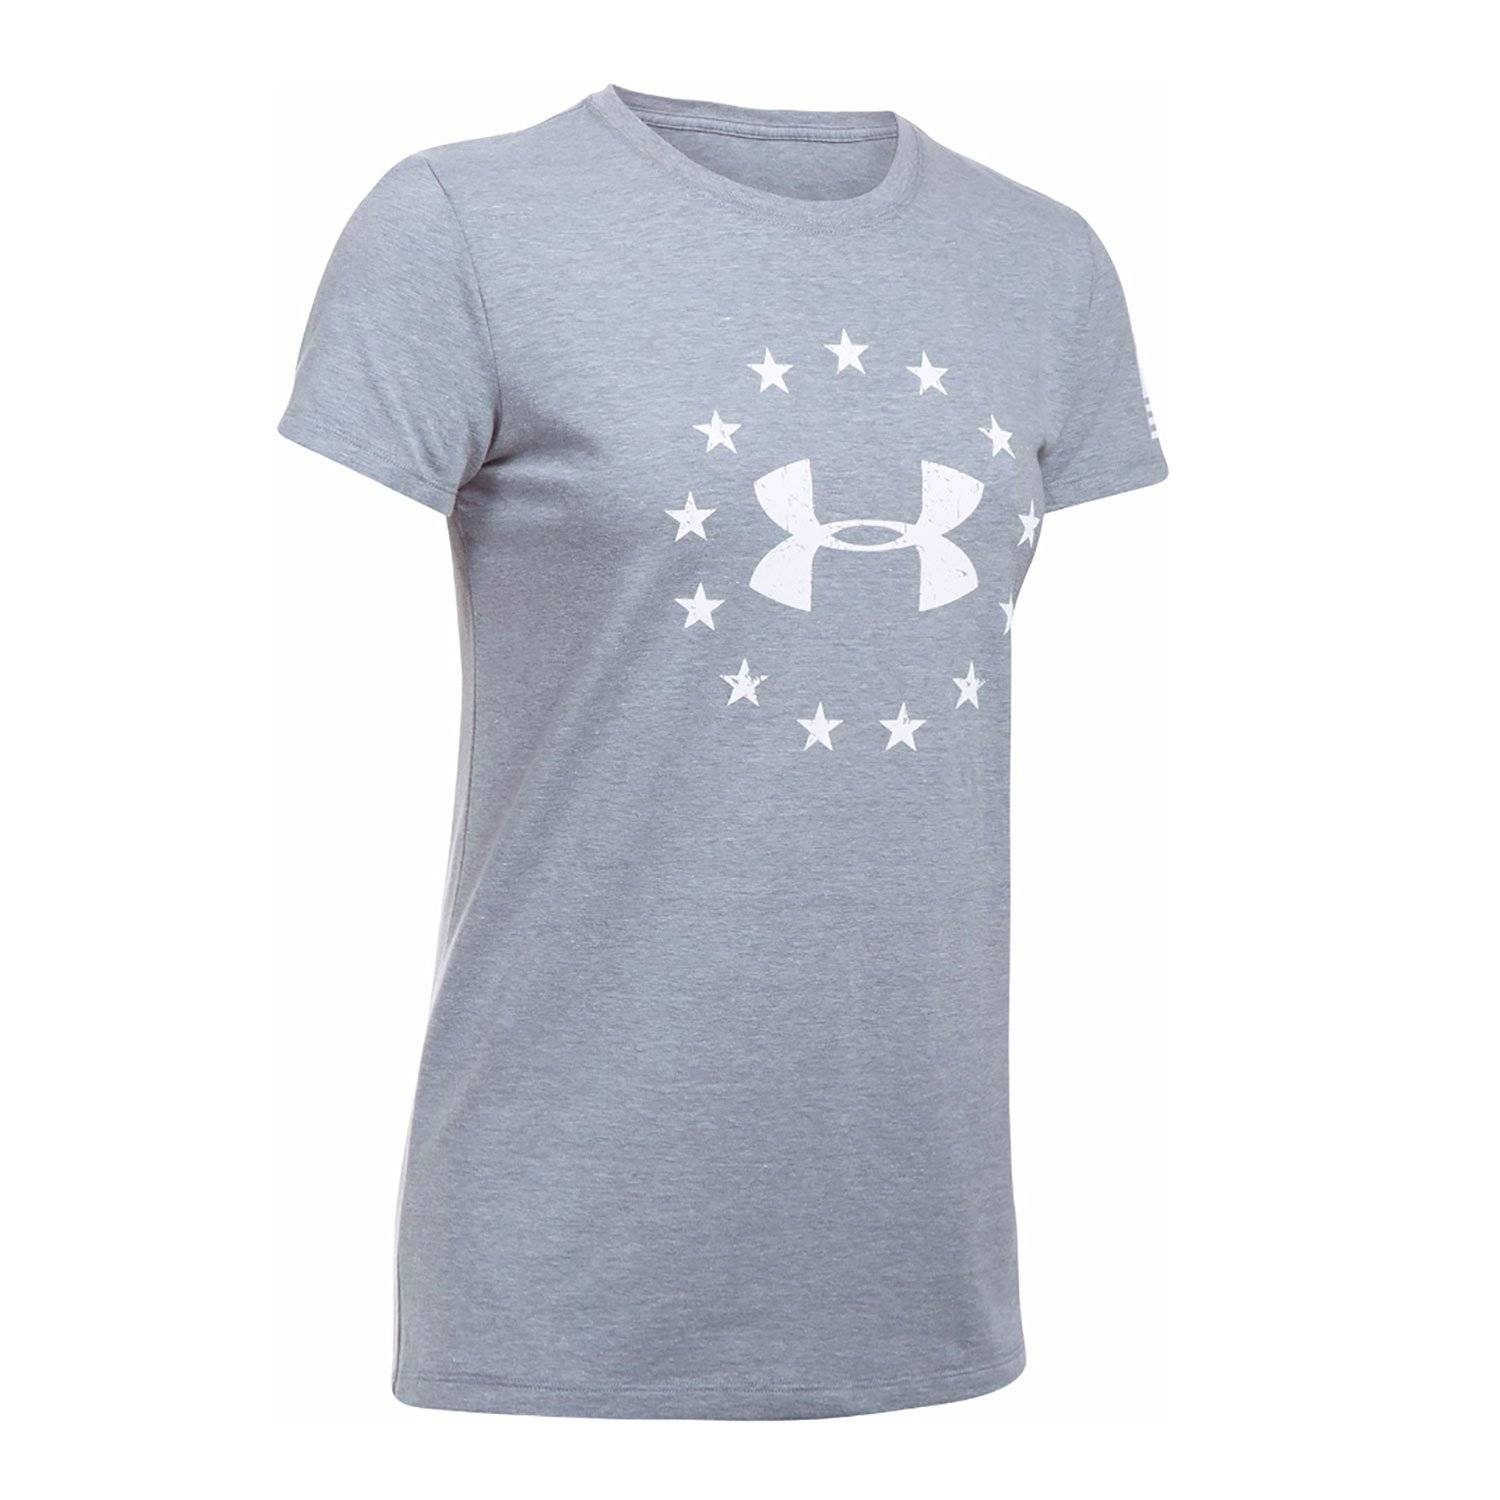 UNDER ARMOUR FREEDOM LOGO 2.0 WOMENS GRAPHIC T-SHIRT